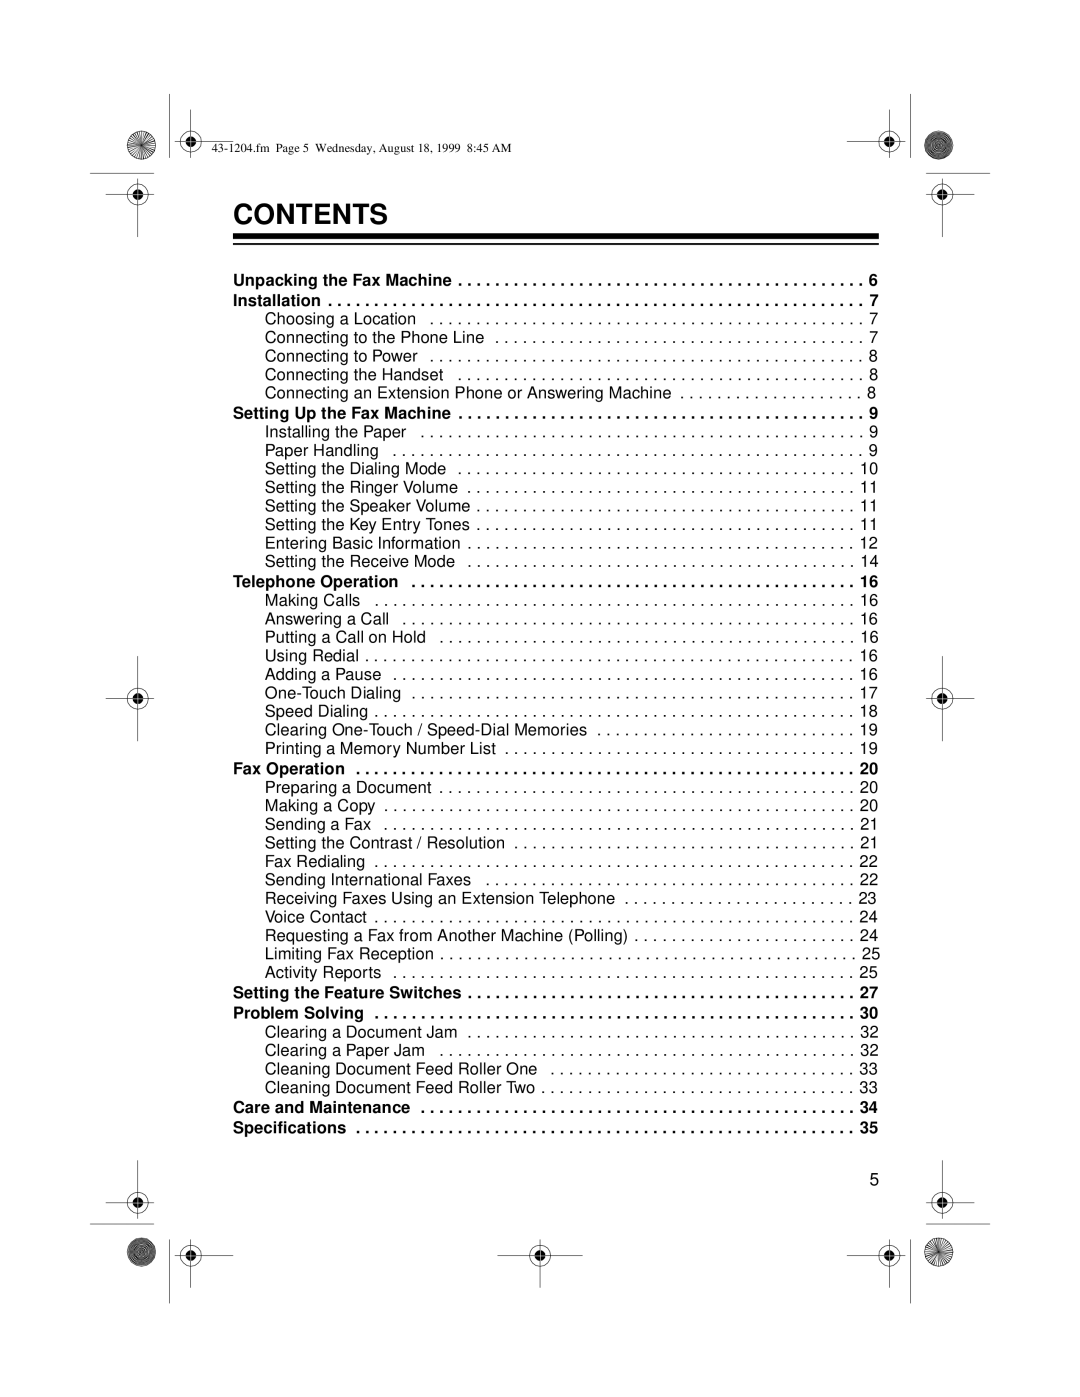 Radio Shack 43-1204 owner manual Contents 